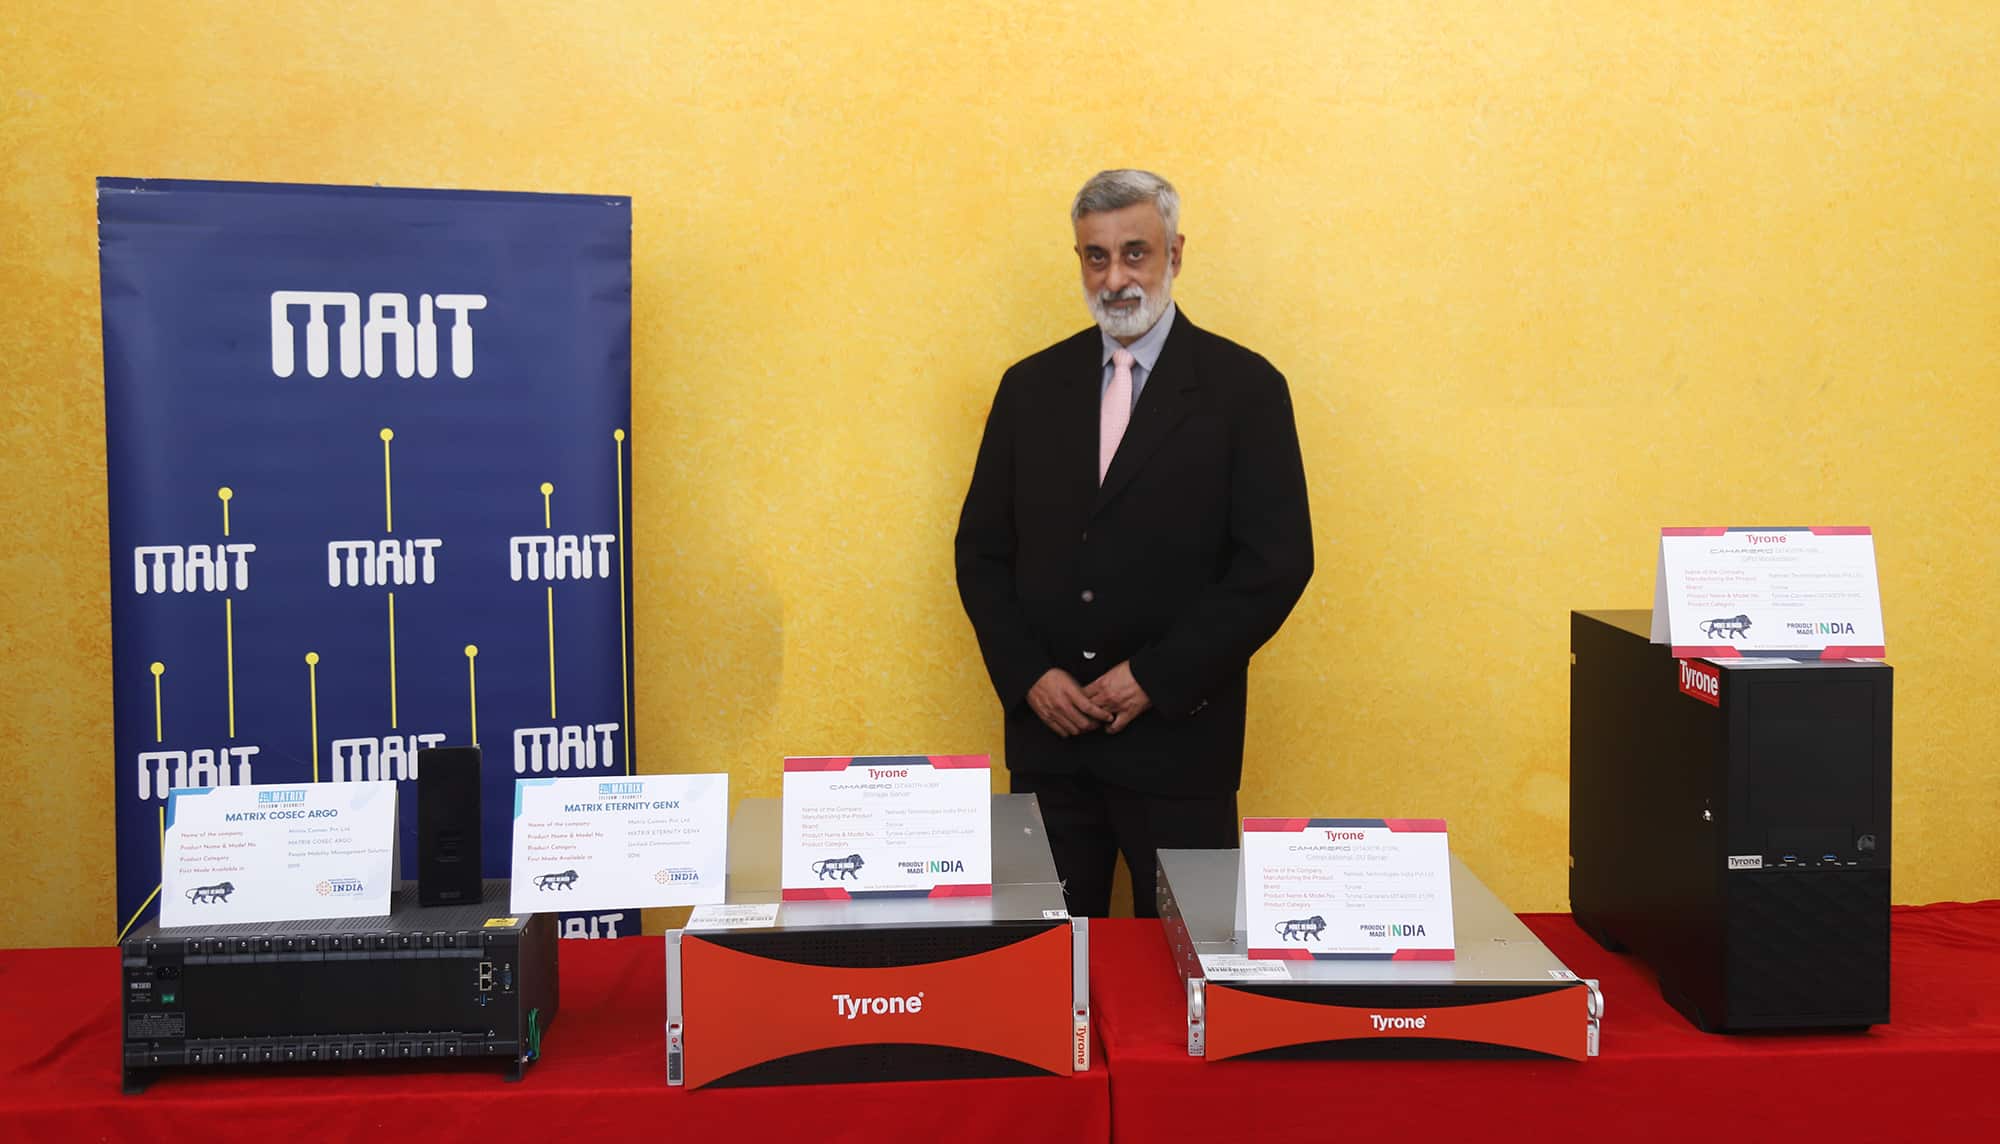 MAIT kickstarts 2021 Summit with launch of Made in India products